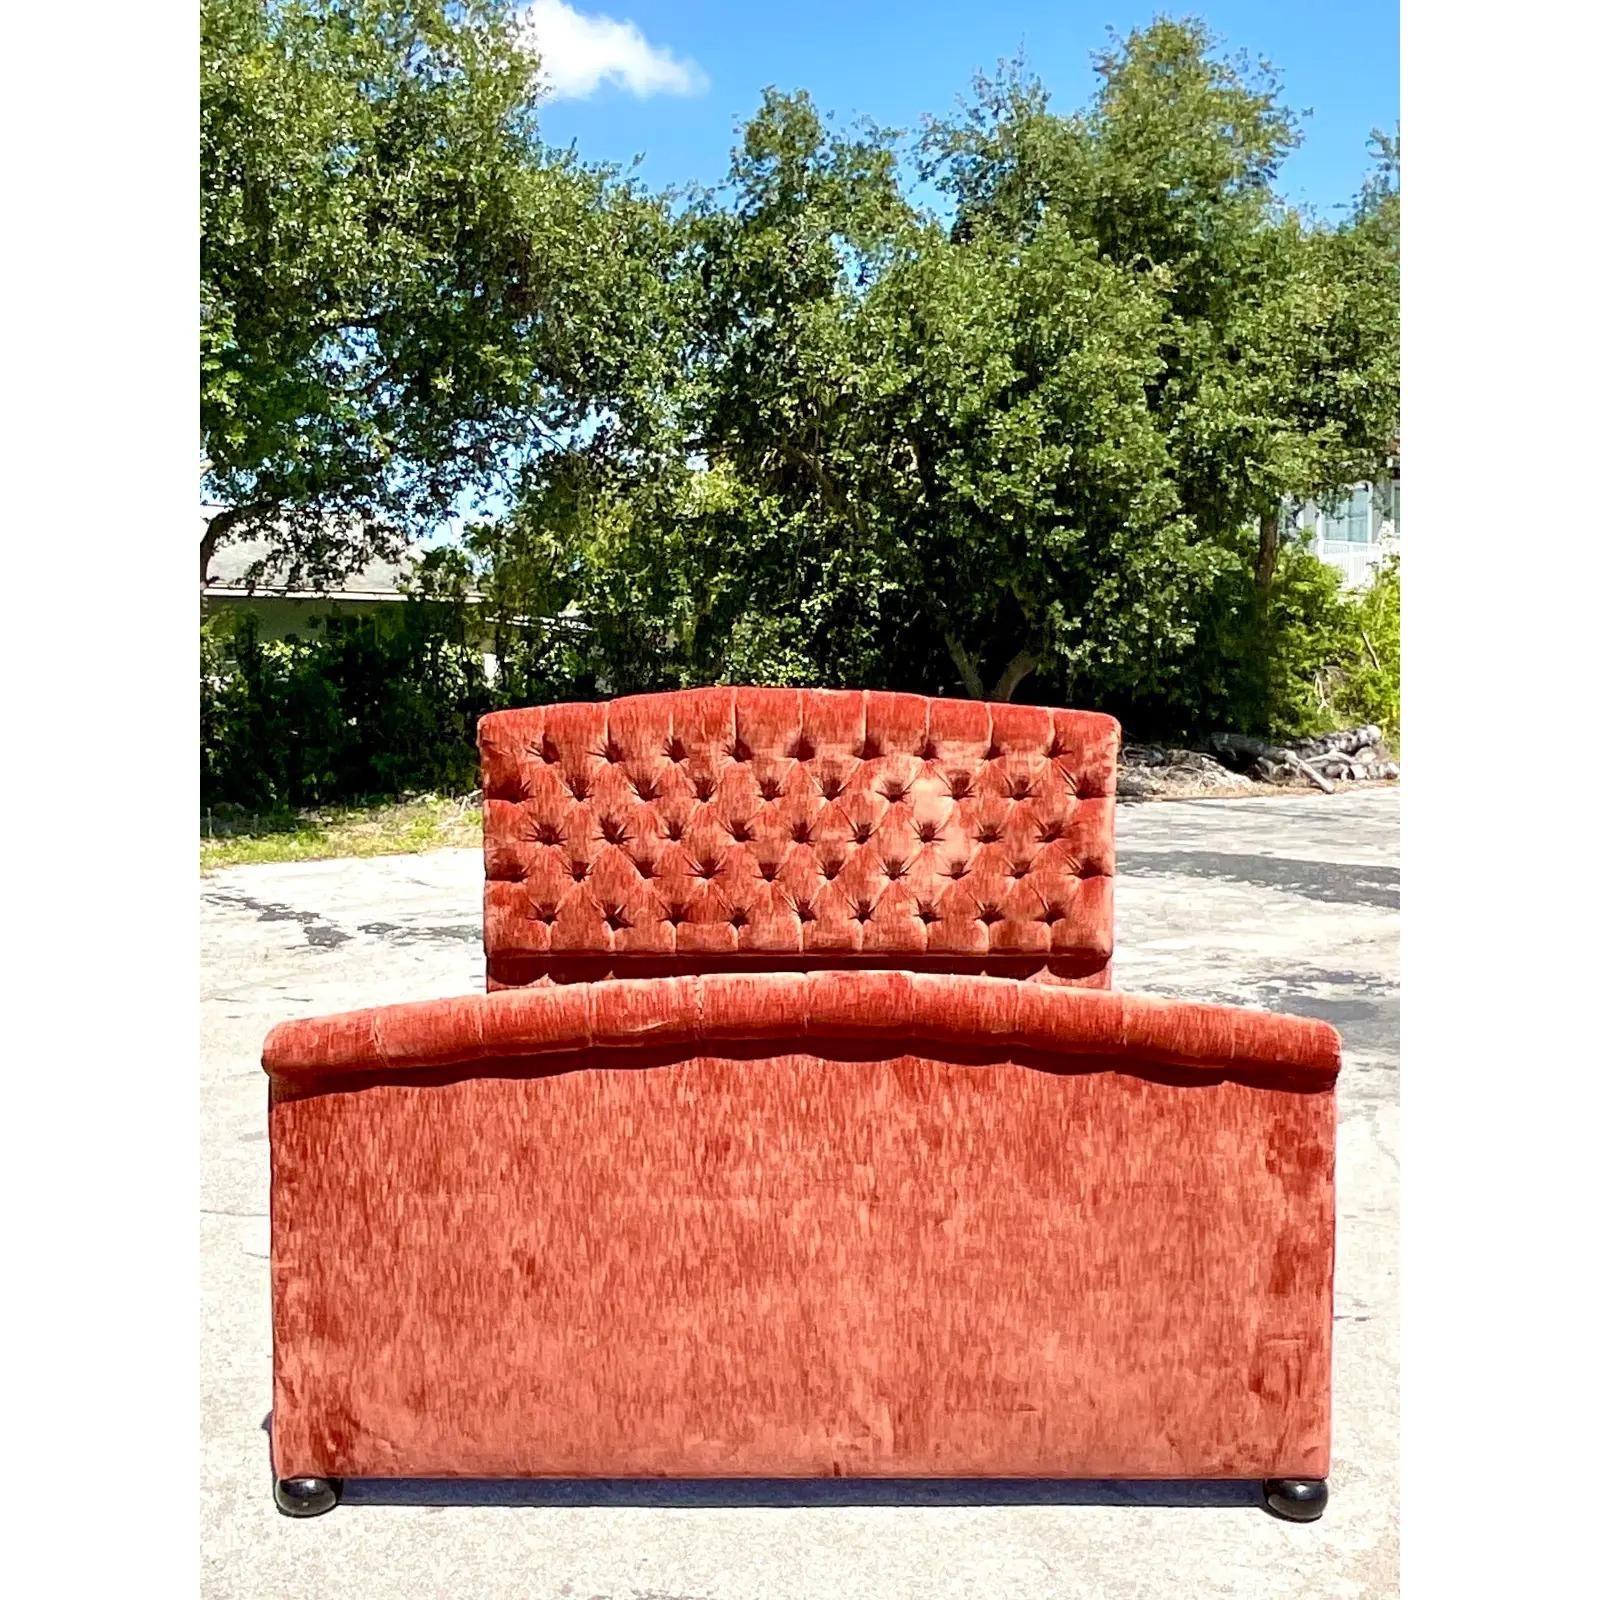 Incredible vintage custom made King bed. Covered in luxurious Lino Lavato burnt orange velvet in a chic tufted design. Glamorous Hugh back and foot board. Acquired from a Palm Beach estate.